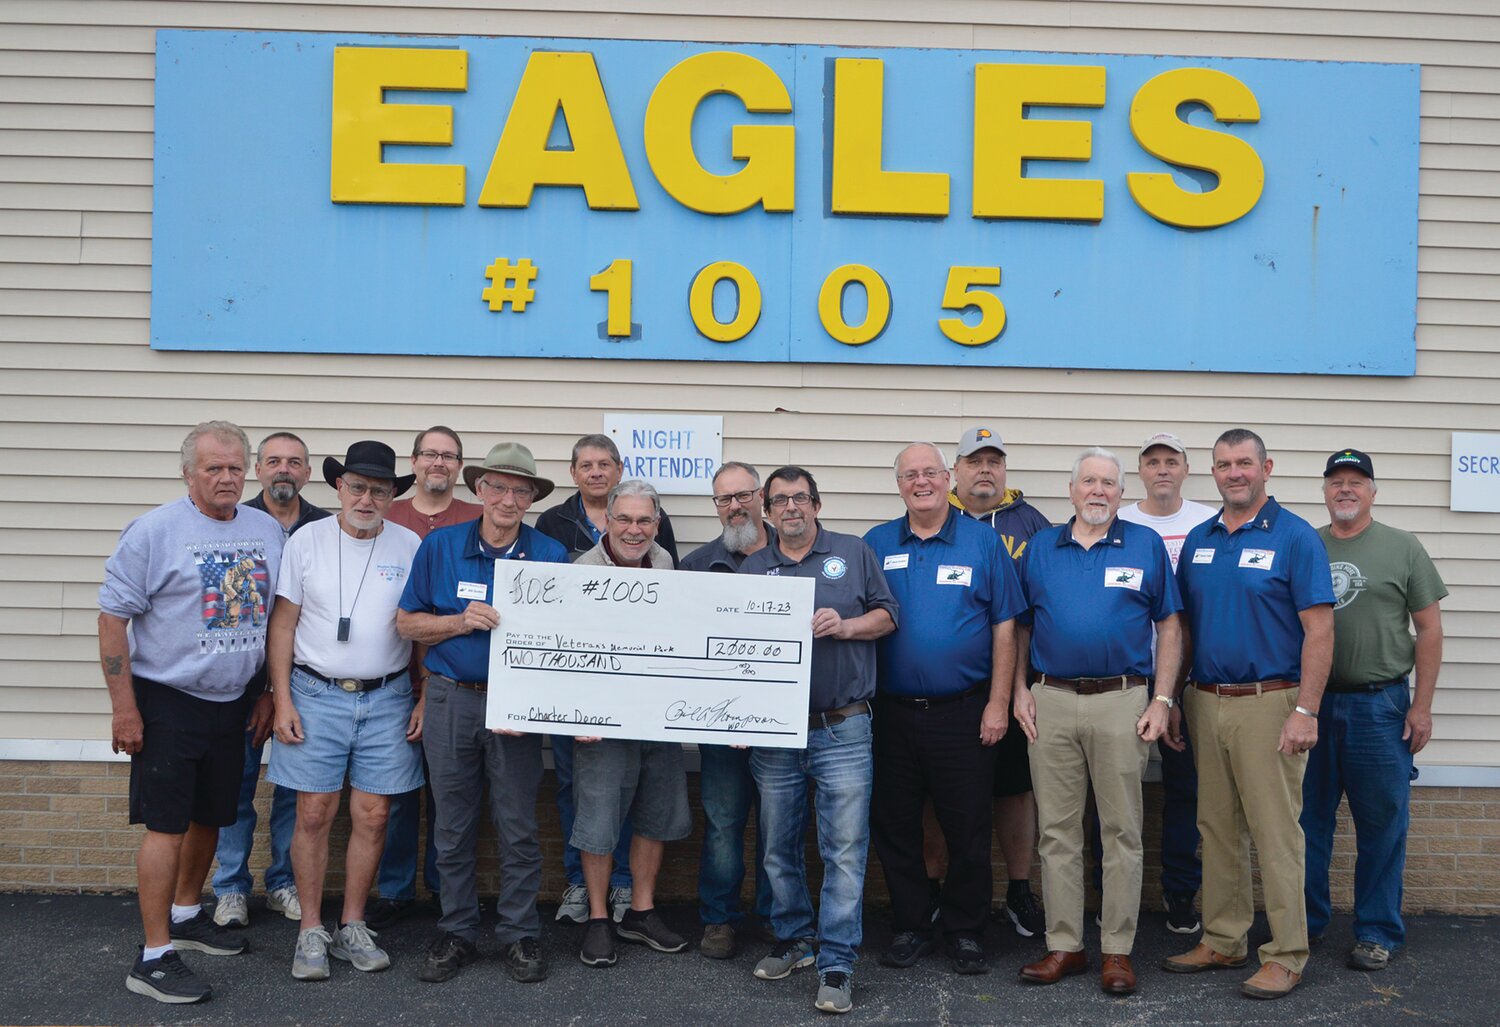 Crawfordsville Aerie 1005 of the Fraternal Order of Eagles recently donated $2,000 to the Veterans Memorial Park. Officers and trustees of the Aerie gathered along with park board members for a check presentation. Pictured, from left, are front row, Terry Smith, Frank Escamilla Jr, Bill Durbin, Aerie president Phil Thompson, Doug Mather, Mark Eustler, Mike Spencer and Kevin Cobb; and back row, Jim Shahan, Brian Foy, Derry Grimes, Terry Craft, Dave Lawhorn and Brett Cating.